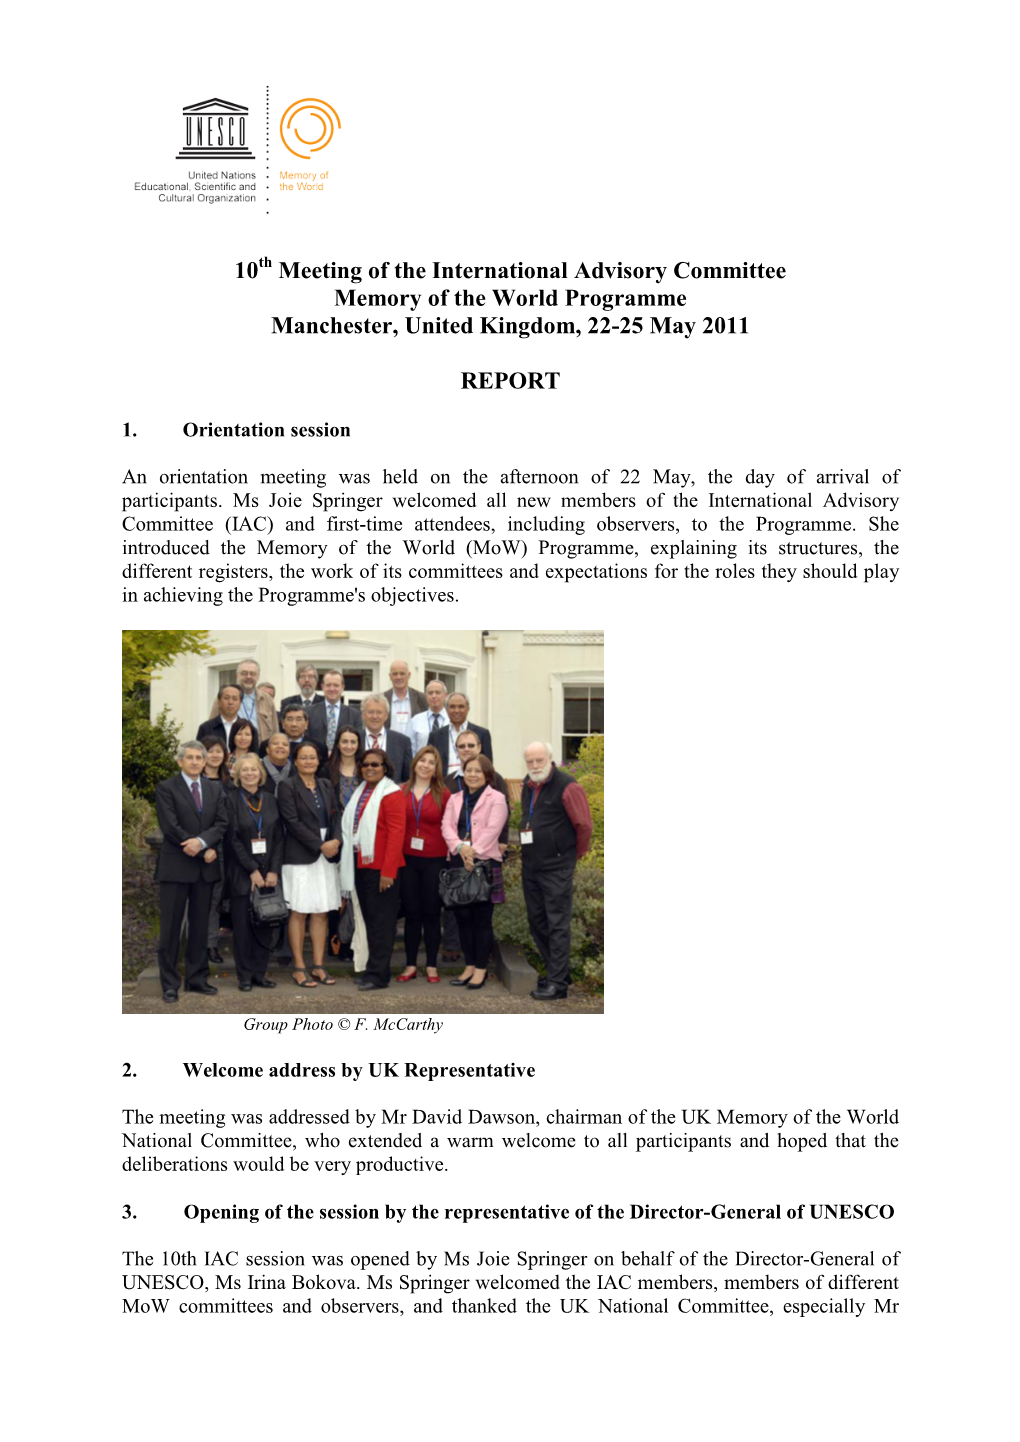 10 Meeting of the International Advisory Committee Memory of The